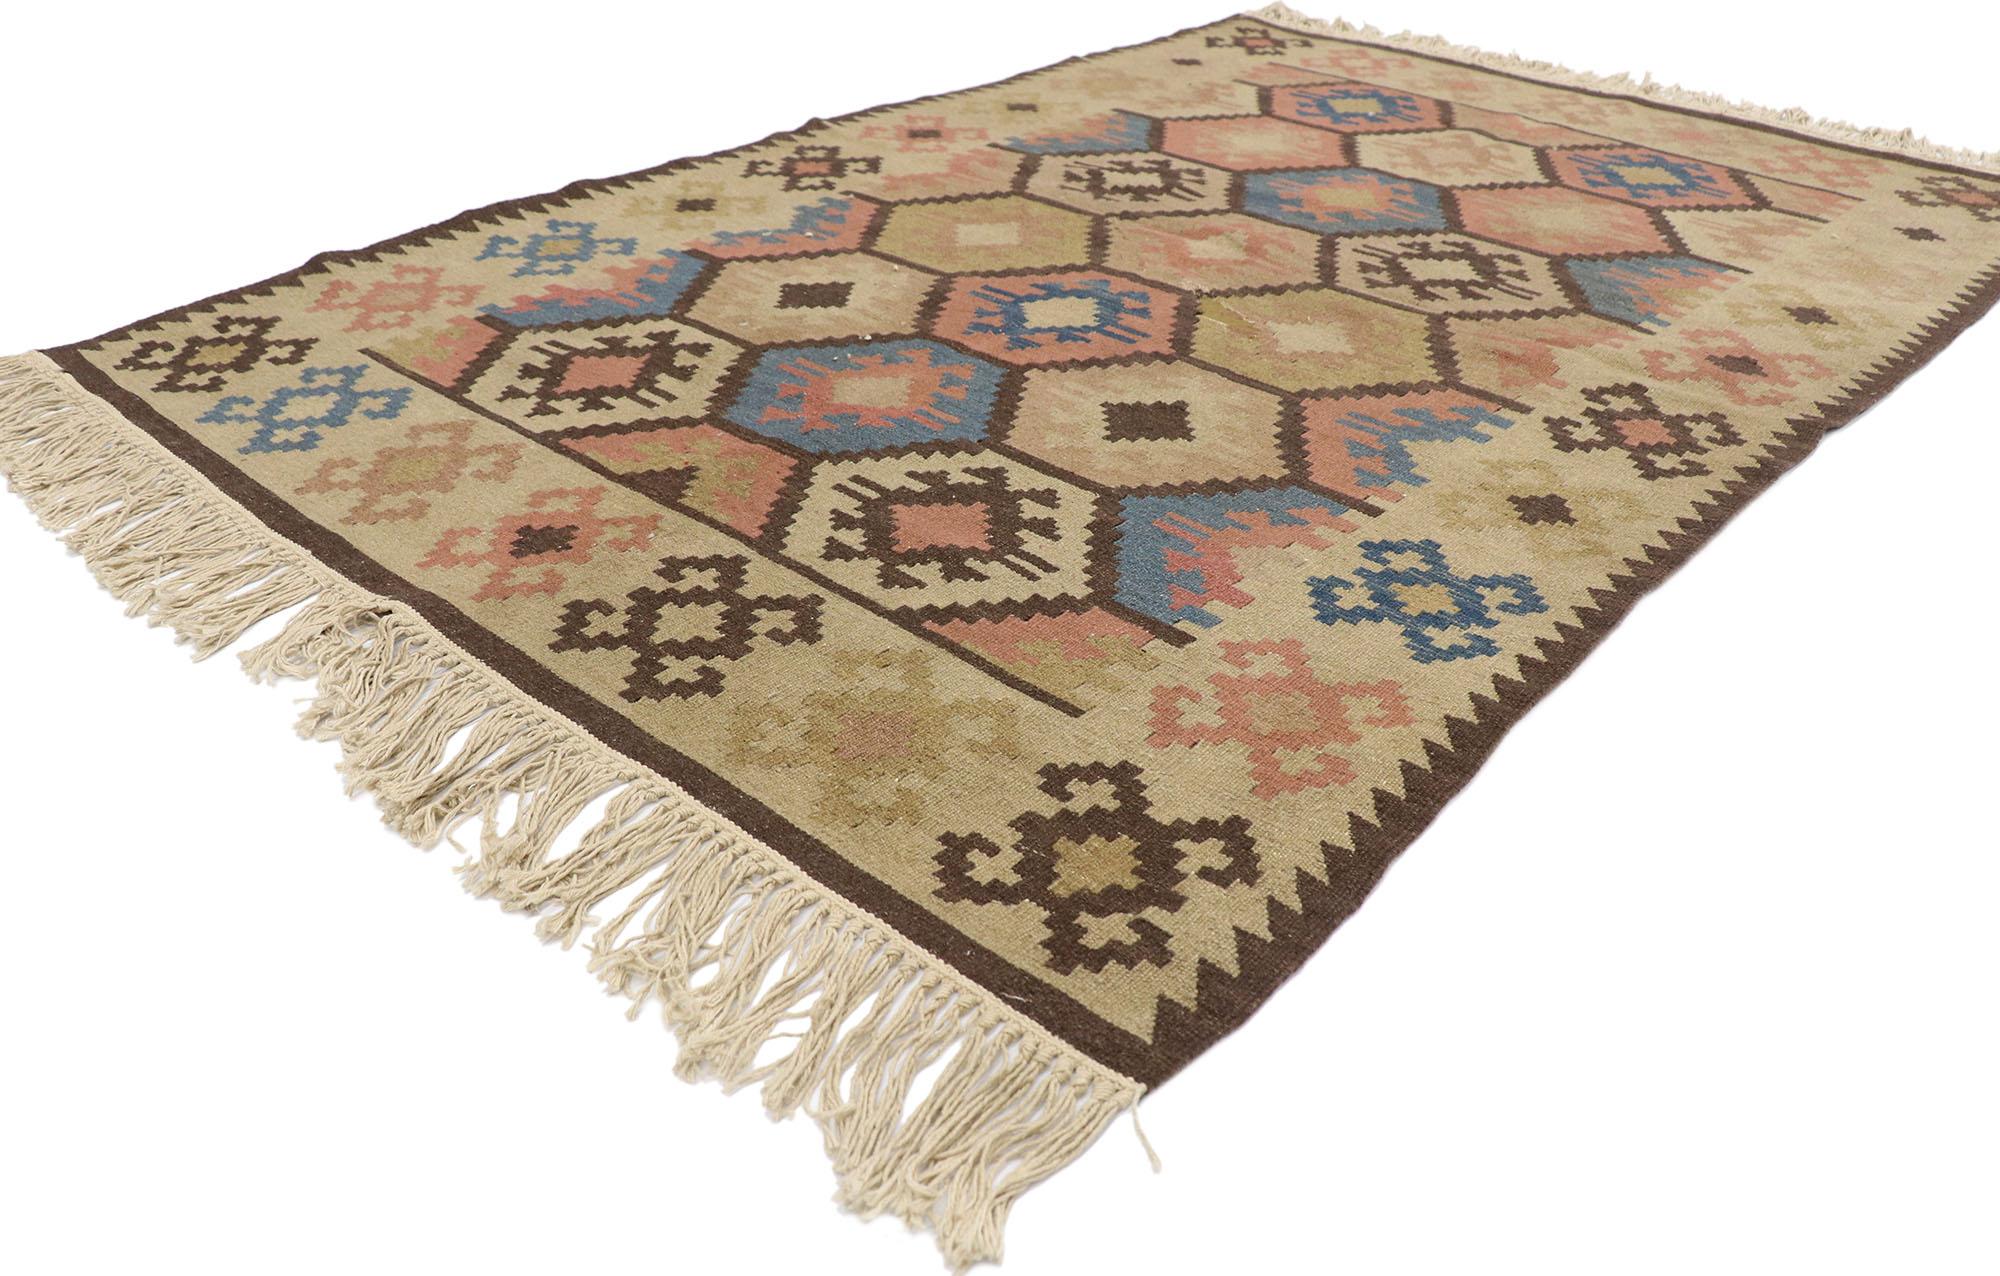 77970 Vintage Persian Shiraz Kilim Rug, 04'01 x 06'01. In the embrace of rustic boho, discover the free-spirited allure of nomadic charm meticulously woven into the fabric of our handwoven wool vintage Persian Shiraz kilim rug. Step onto this